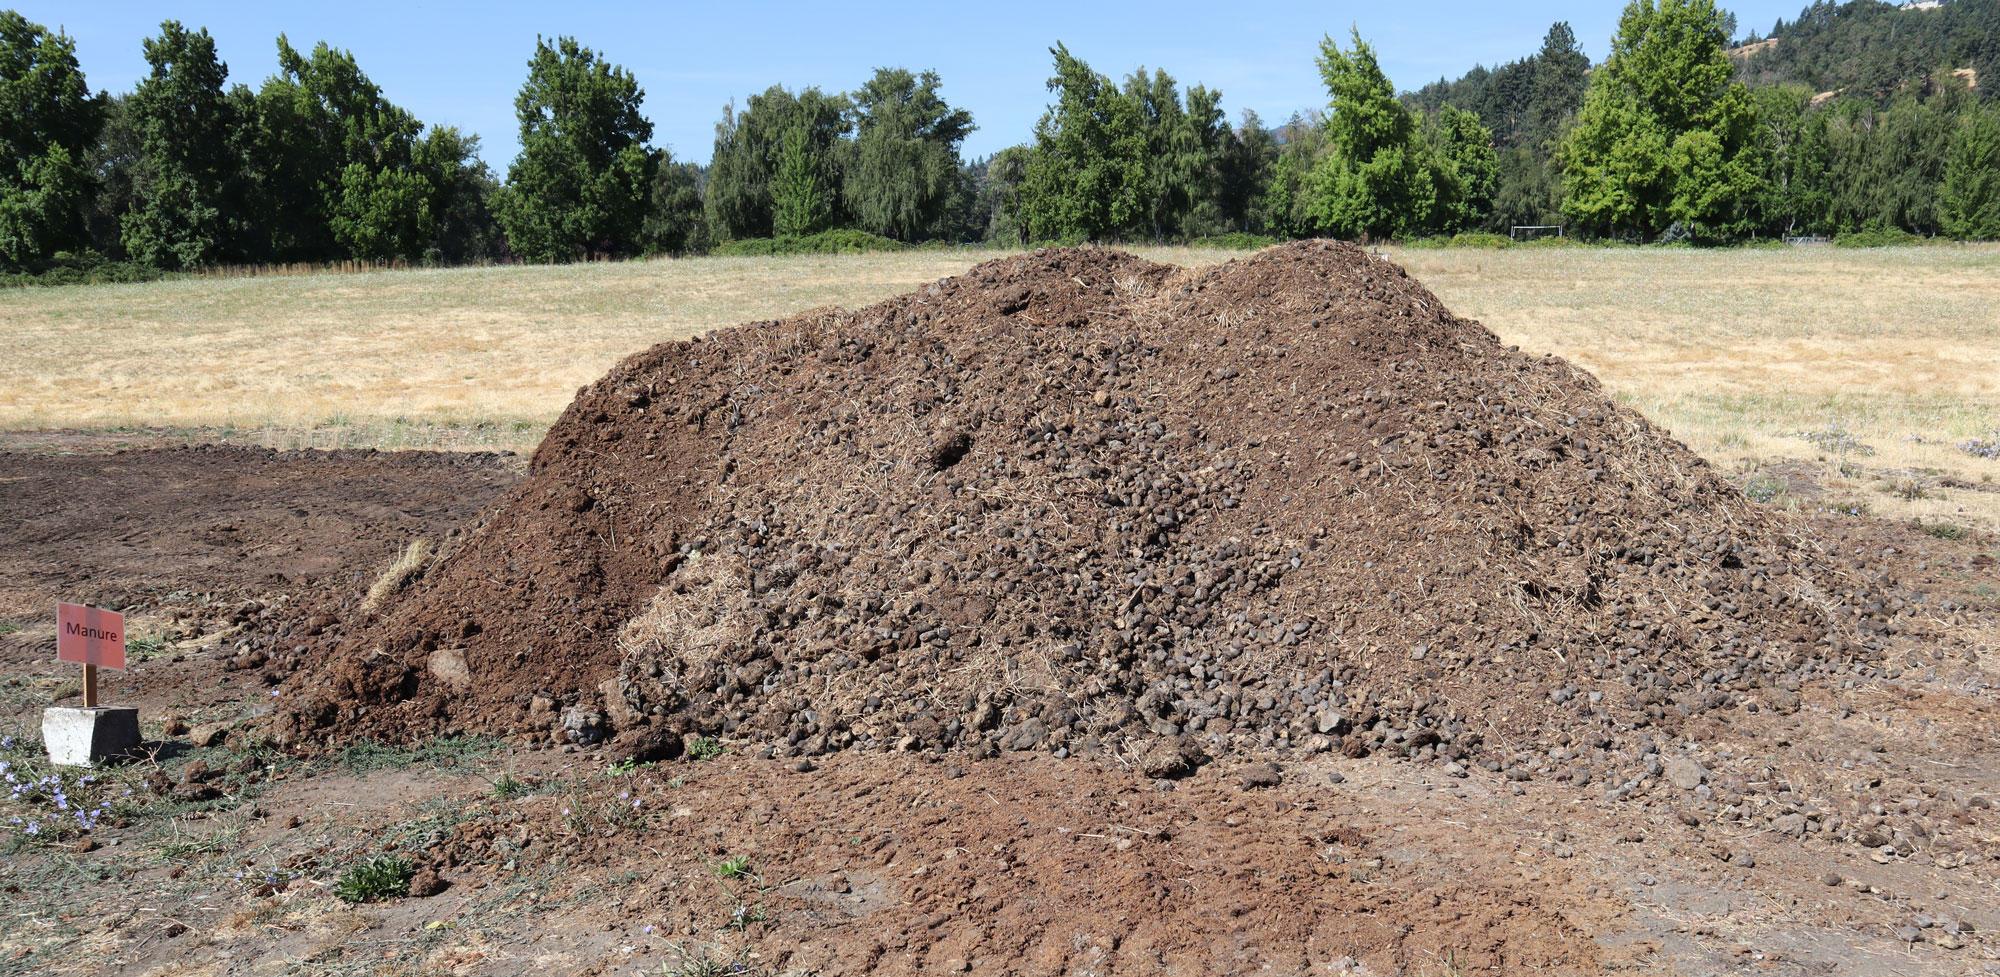 Livestock manure is rich in nutrients that make it a great organic fertilizer for your garden.